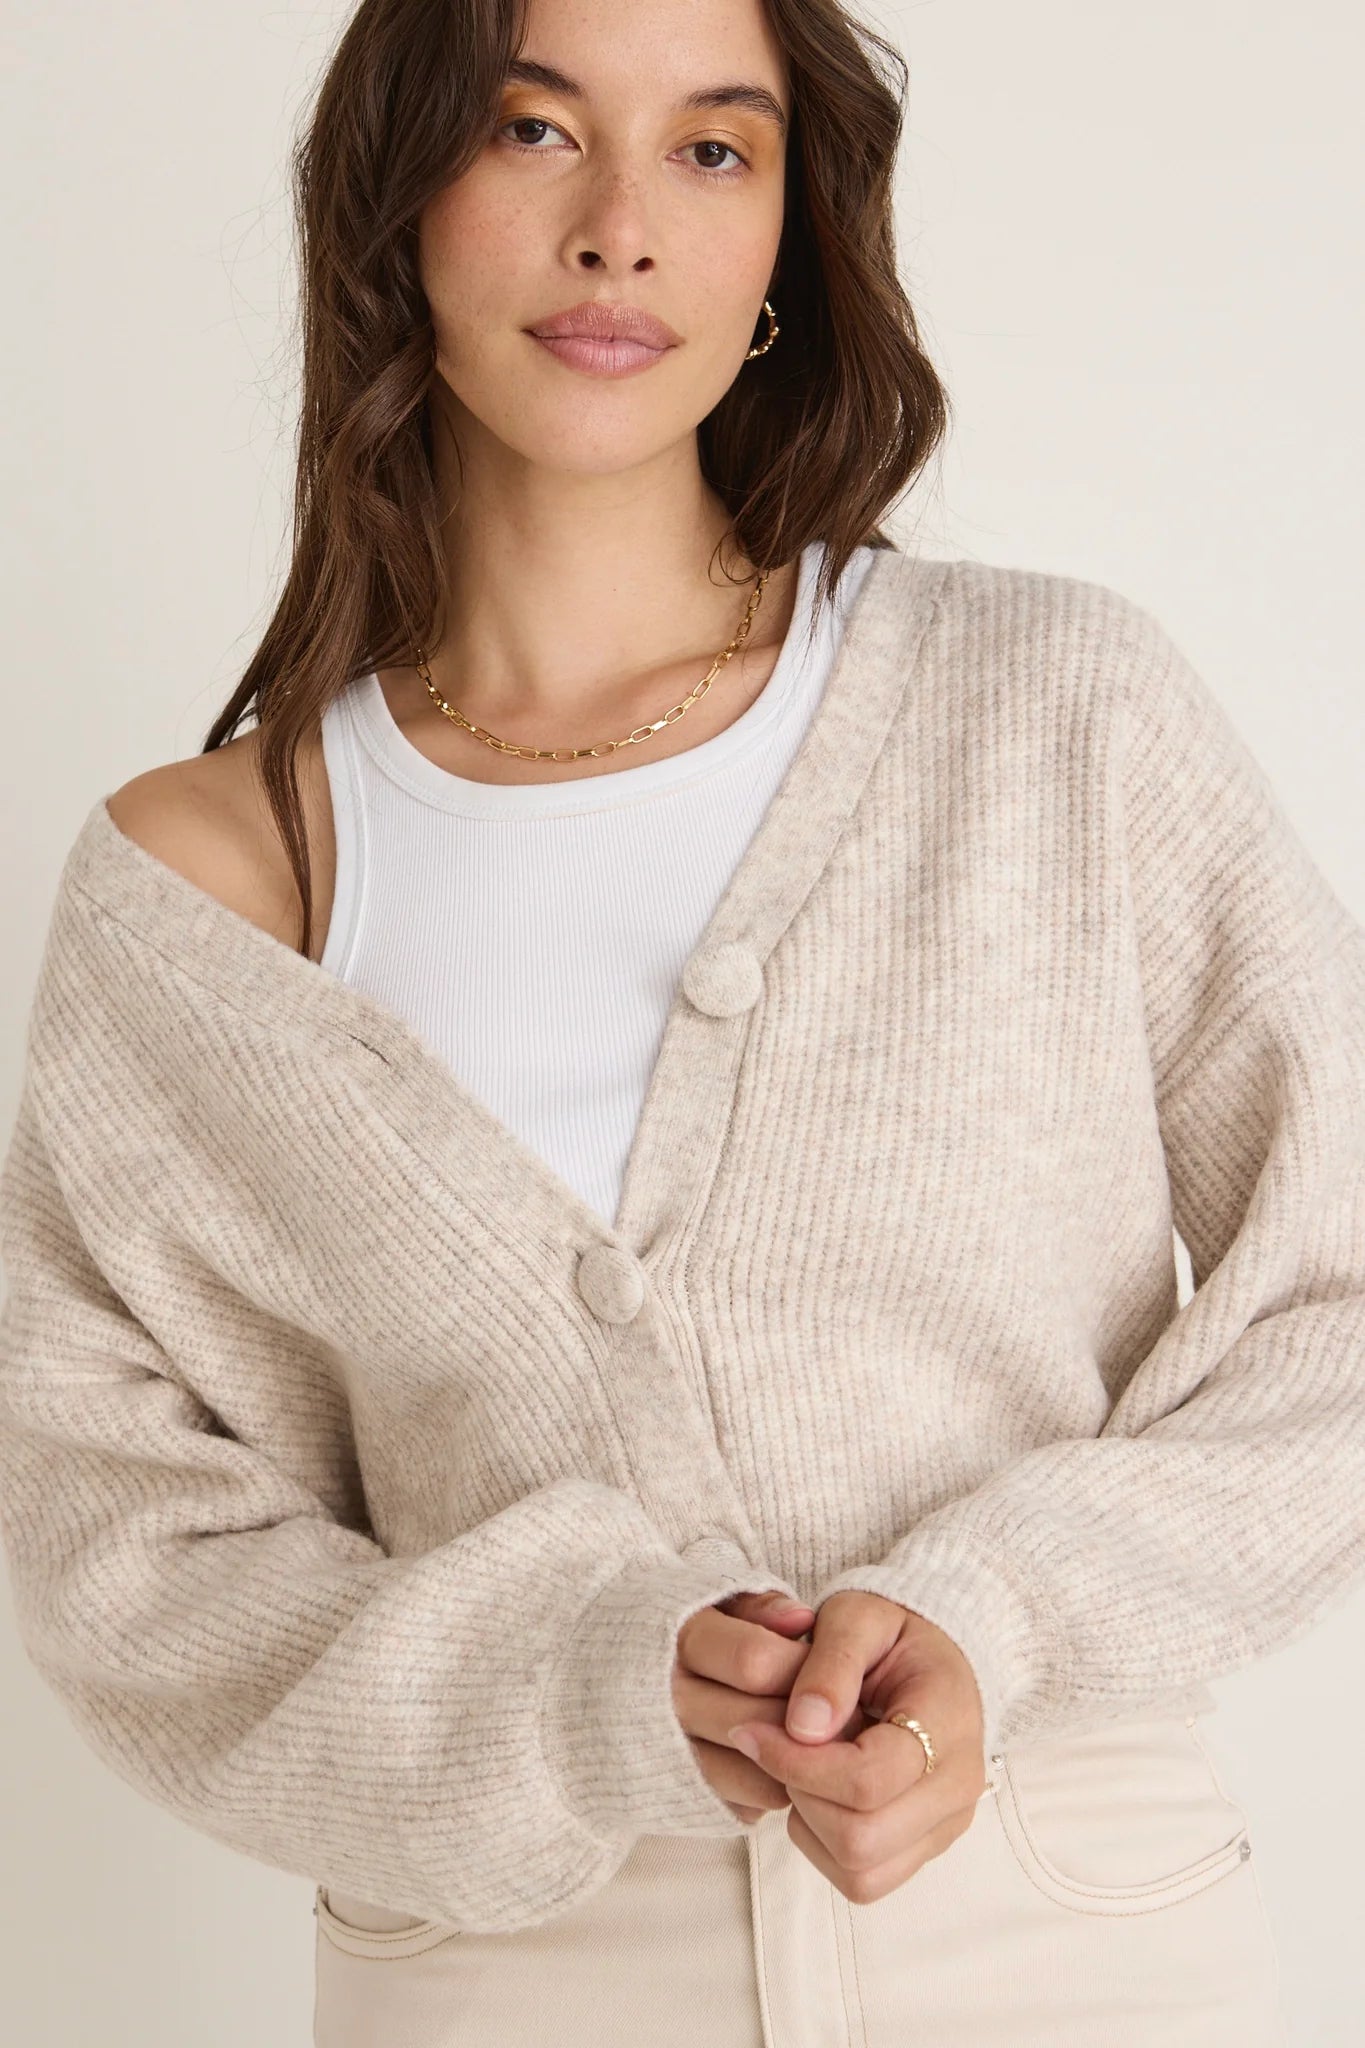 Wholesome Oat Chunky Knit Cardigan